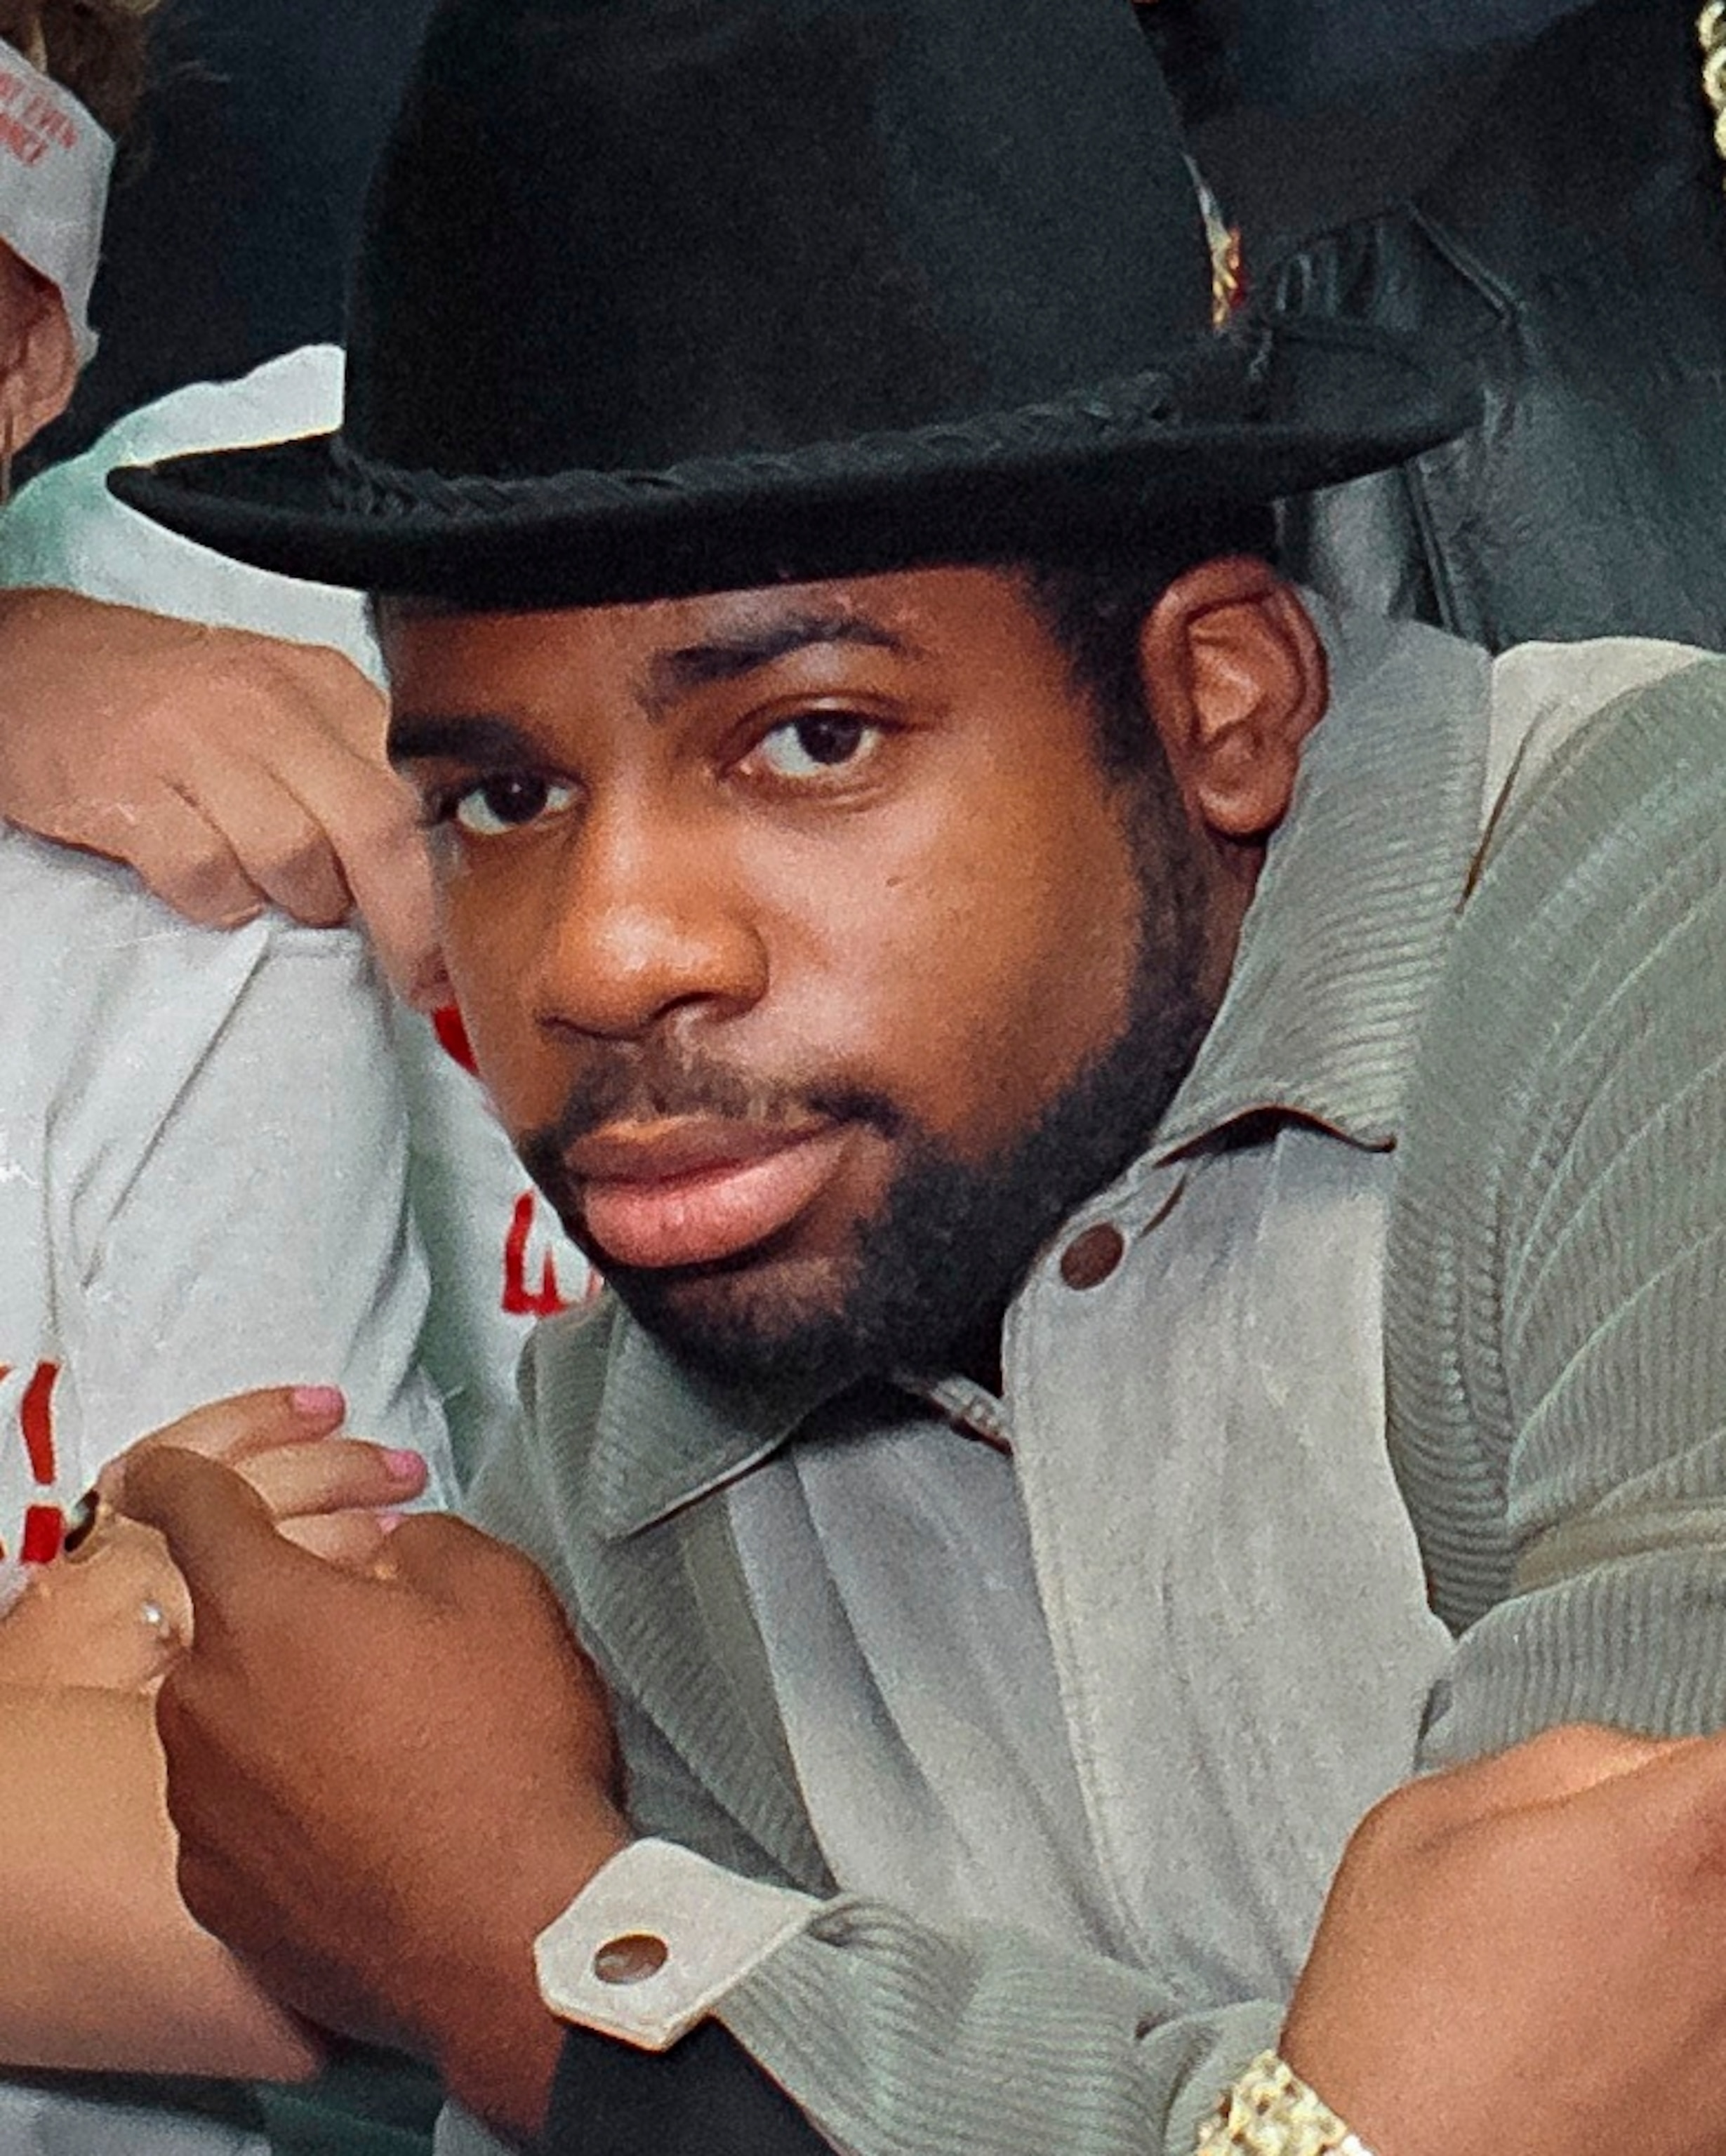 PHOTO: In this Oct. 7, 1986 file photo, Run-D.M.C.'s Jason Mizell, known as Jam-Master Jay, poses during an anti-drug rally at Madison Square Garden in New York.